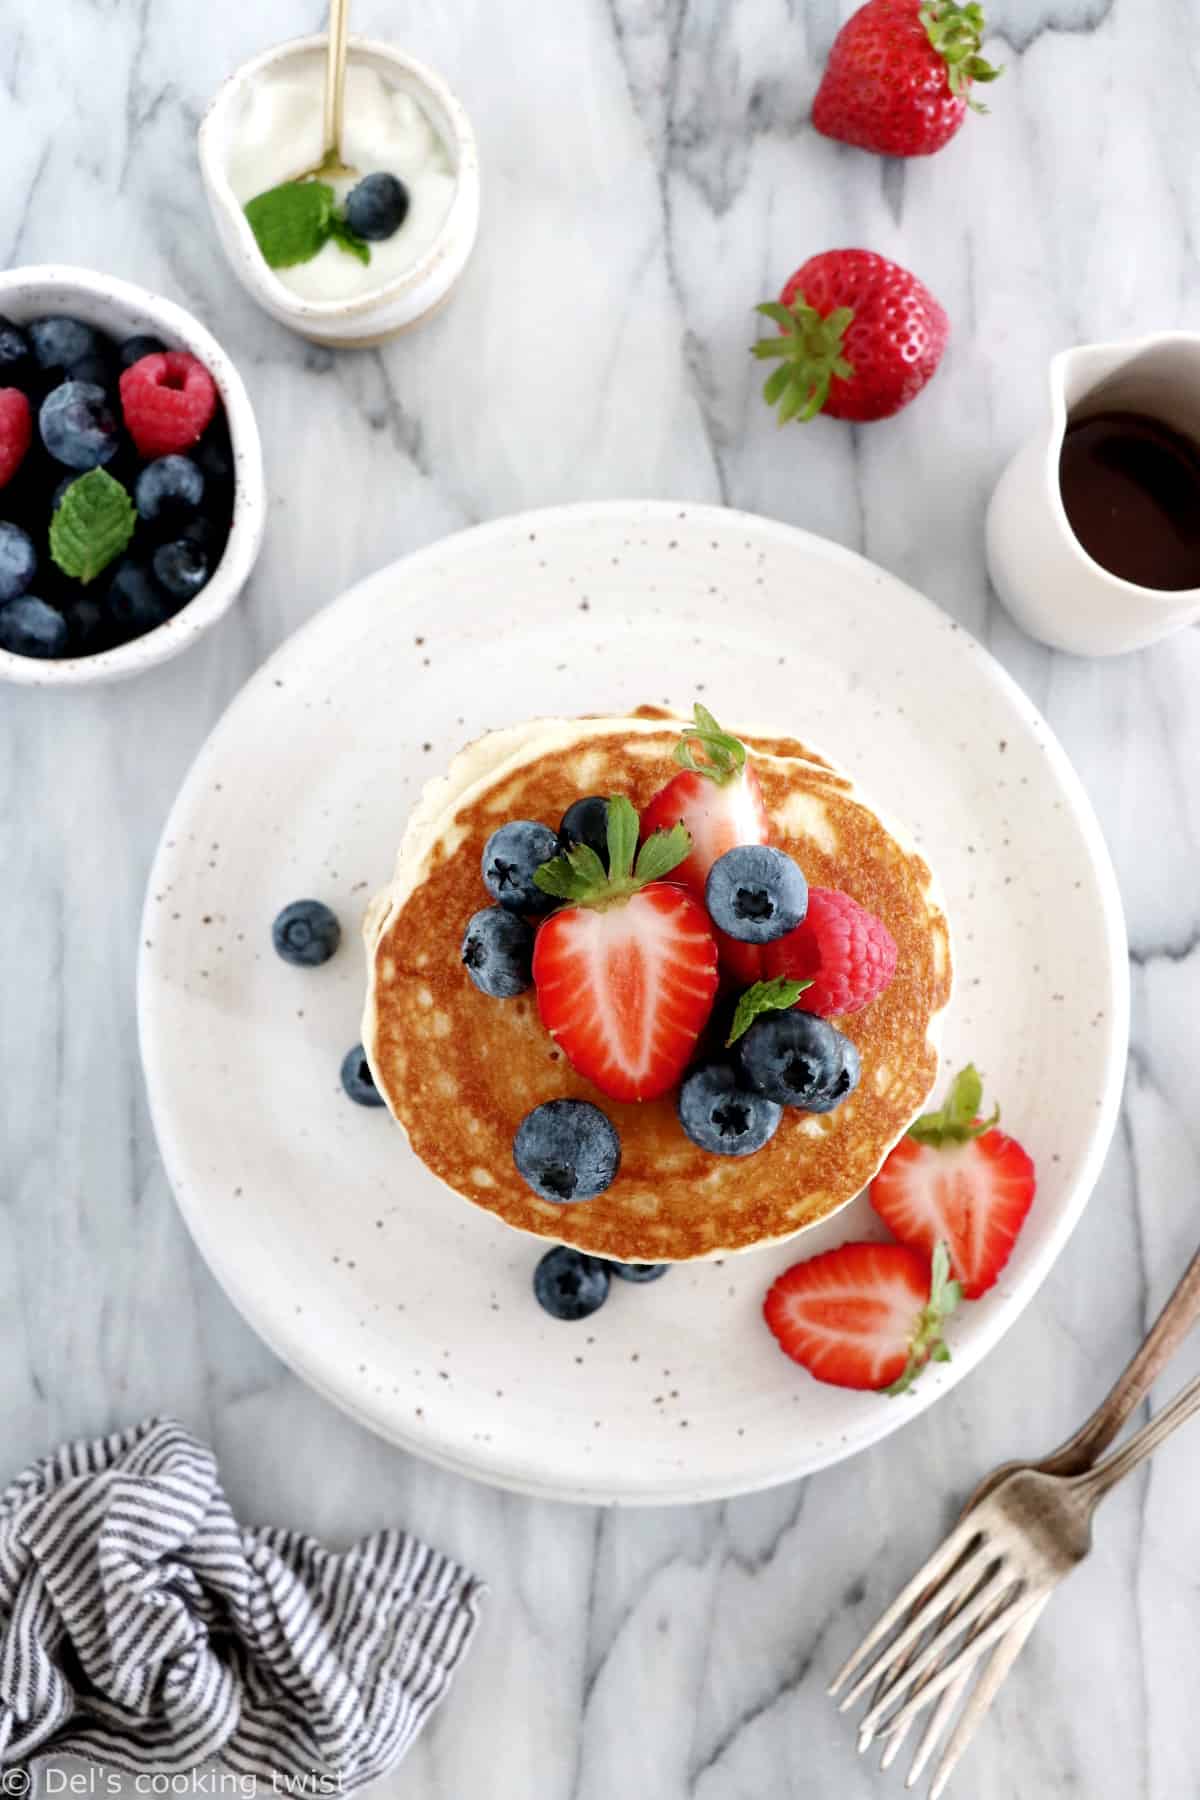 These easy fluffy American pancakes are the BEST pancake recipe you can possibly find. With only 6 ingredients and 2 minutes preparation, you get generous and fluffy pancakes with no effort.